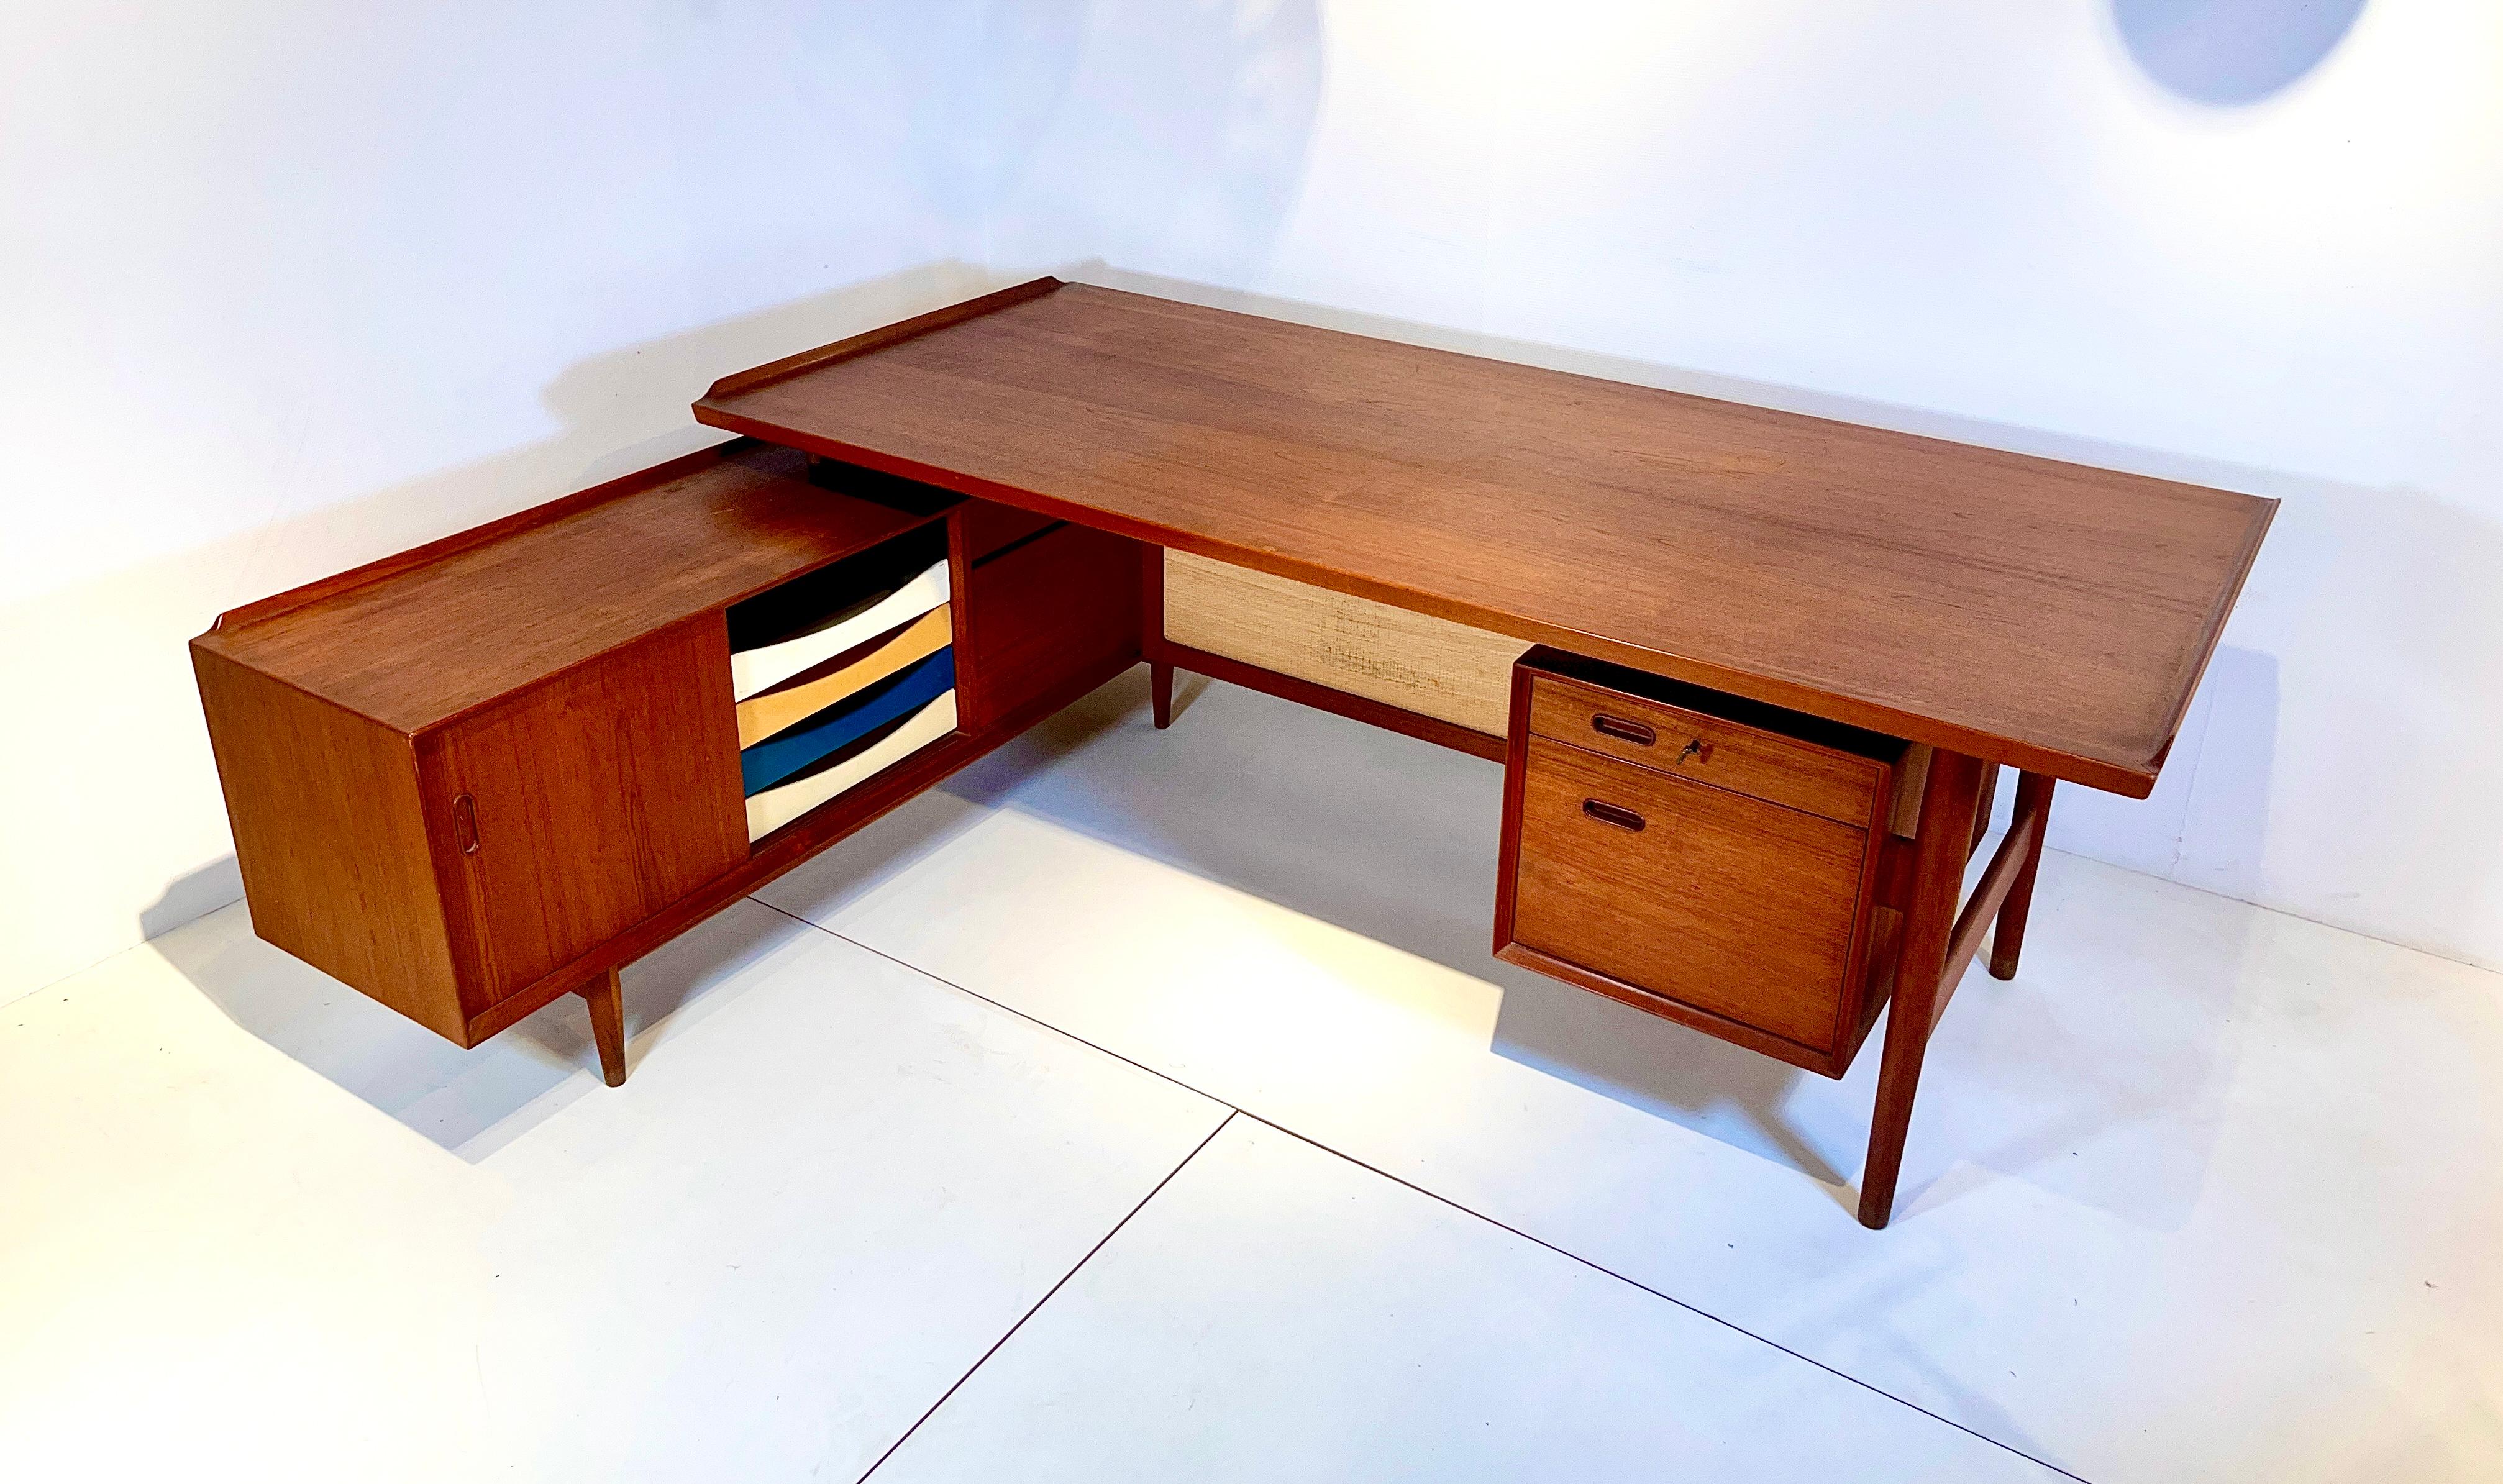 An iconic high end desk with sideboard, designed by Arne Vodder in the 1950's. Made in teak with the original lacquered drawers in different colors and the seagrass separation panel, with key. Very good conditions with some traces of ware.